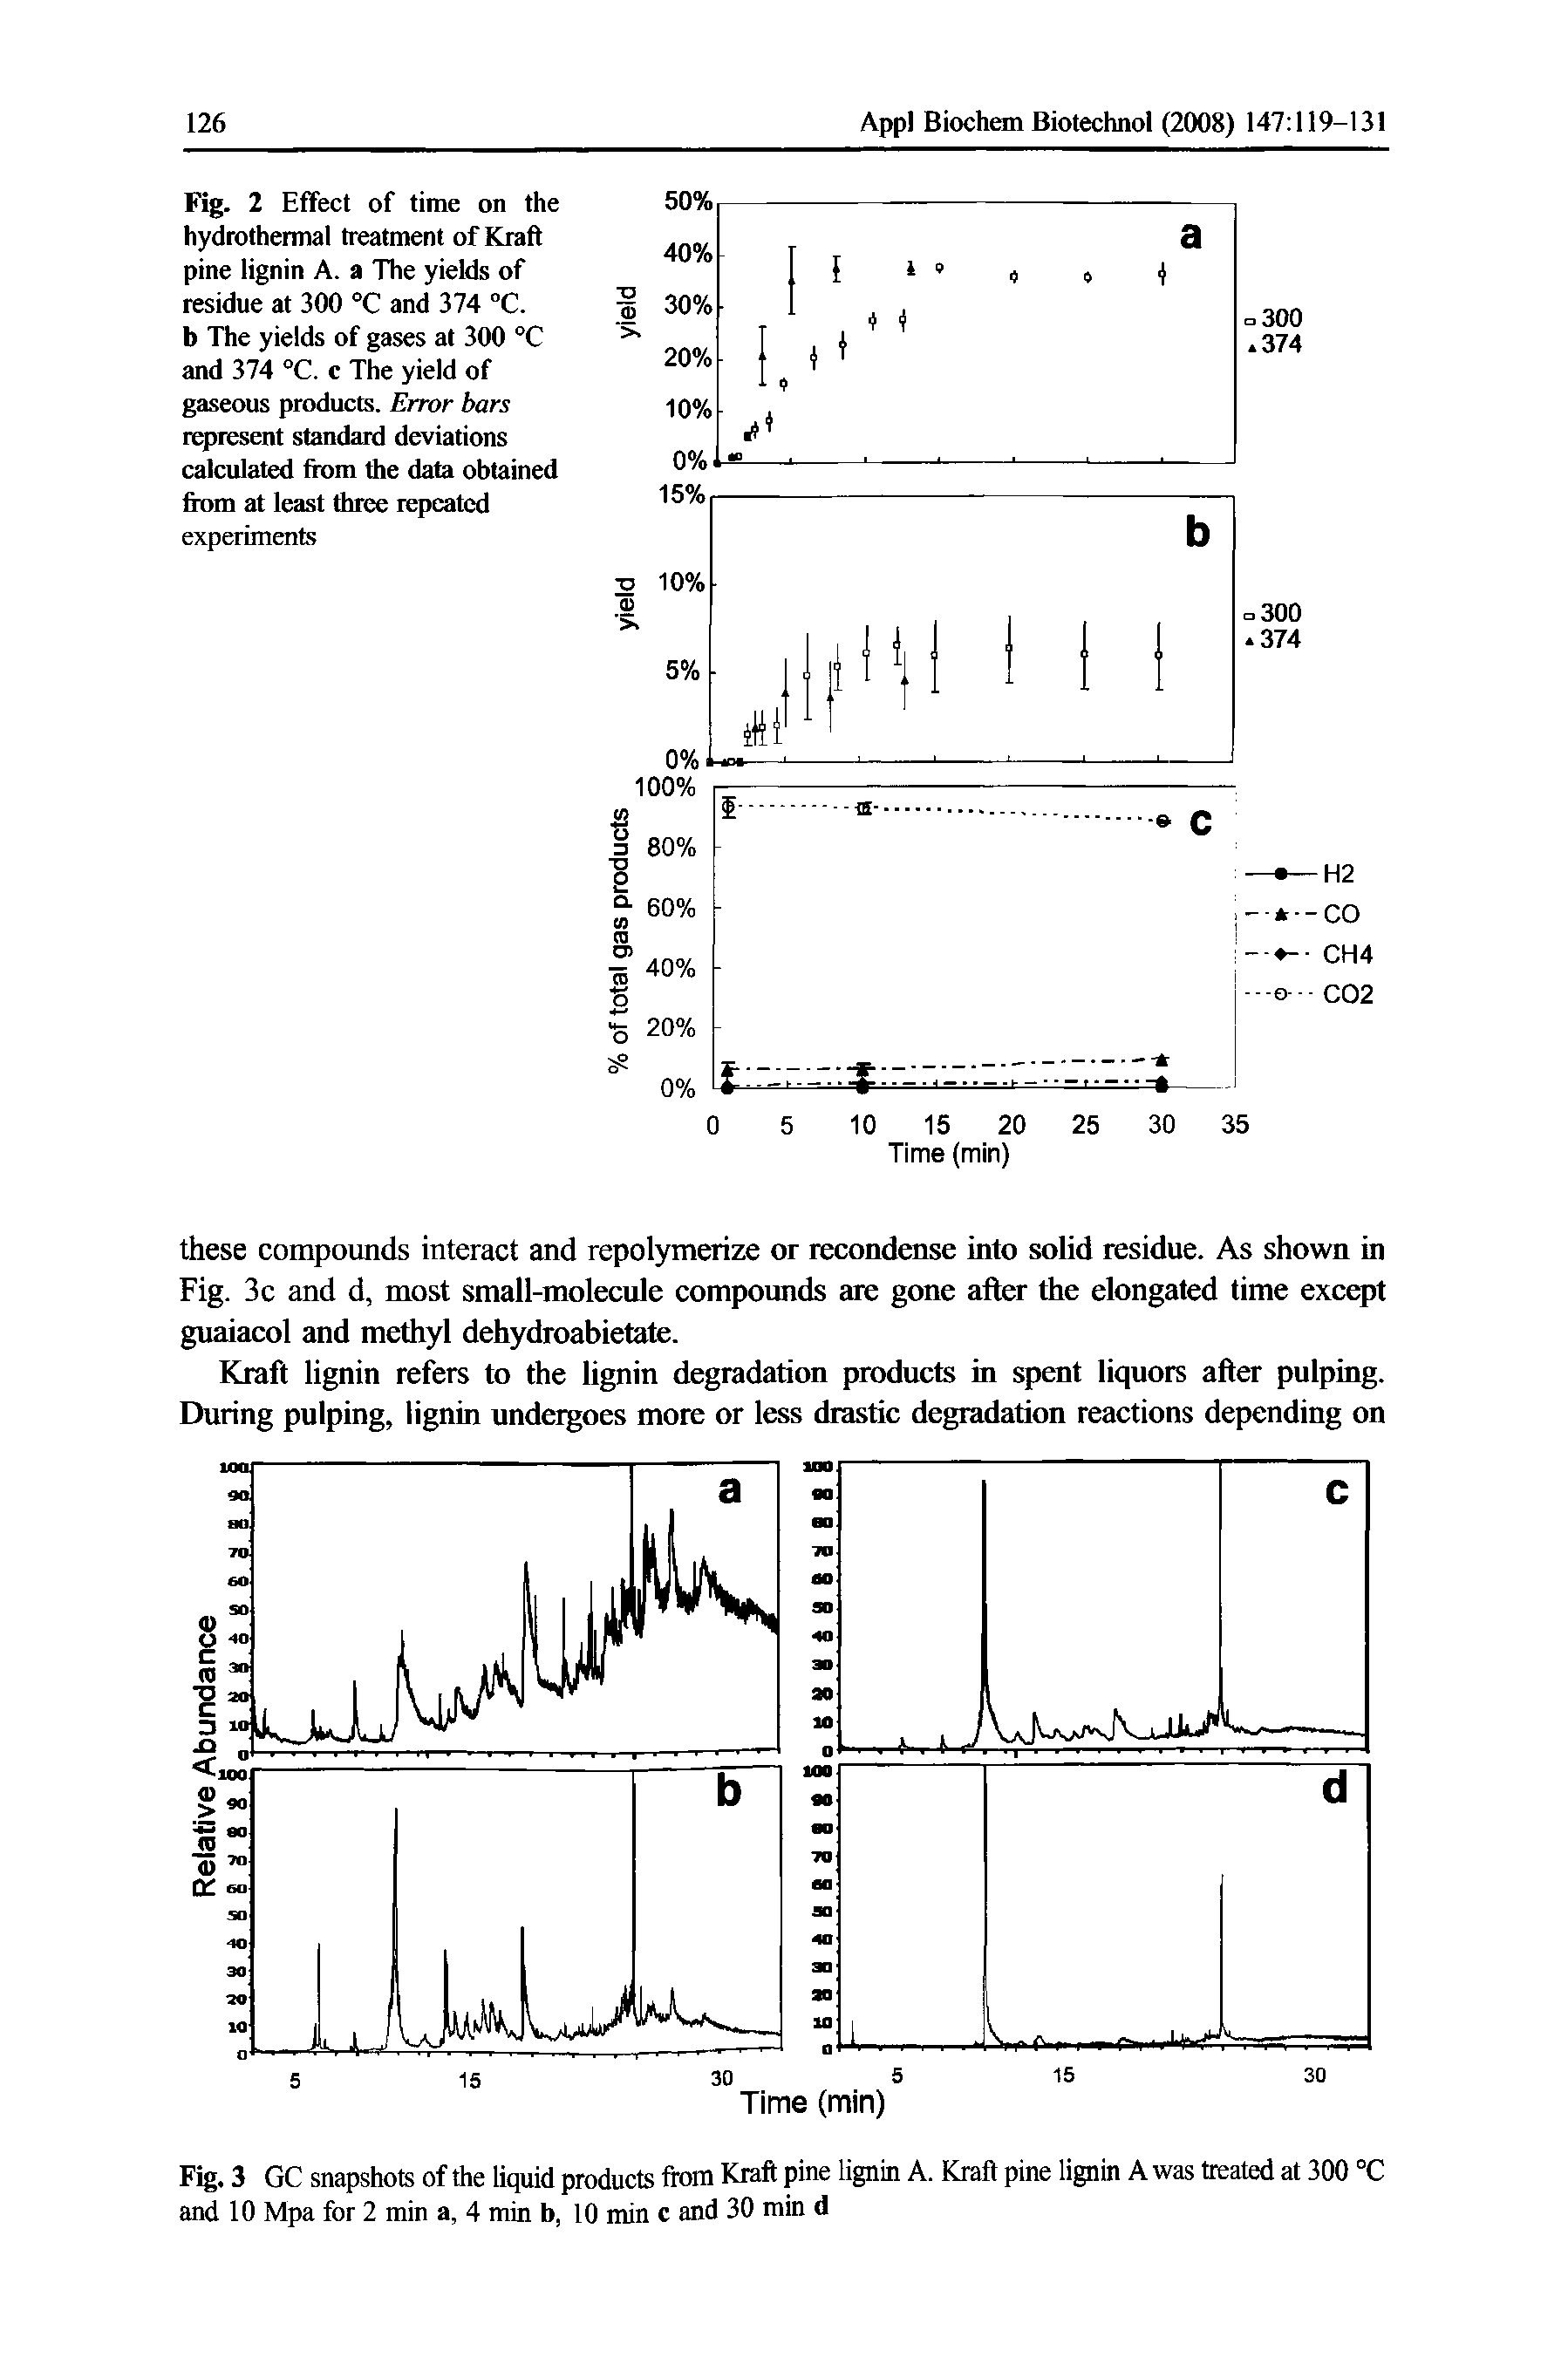 Fig. 2 Effect of time on the hydrothermal treatment of Kraft pine lignin A. a The yields of residue at 300 °C and 374 °C. b The yields of gases at 300 °C and 374 °C. c The yield of gaseous products. Error bars represent standard deviations calculated fiom the data obtained fiom at least three repeated experiments...